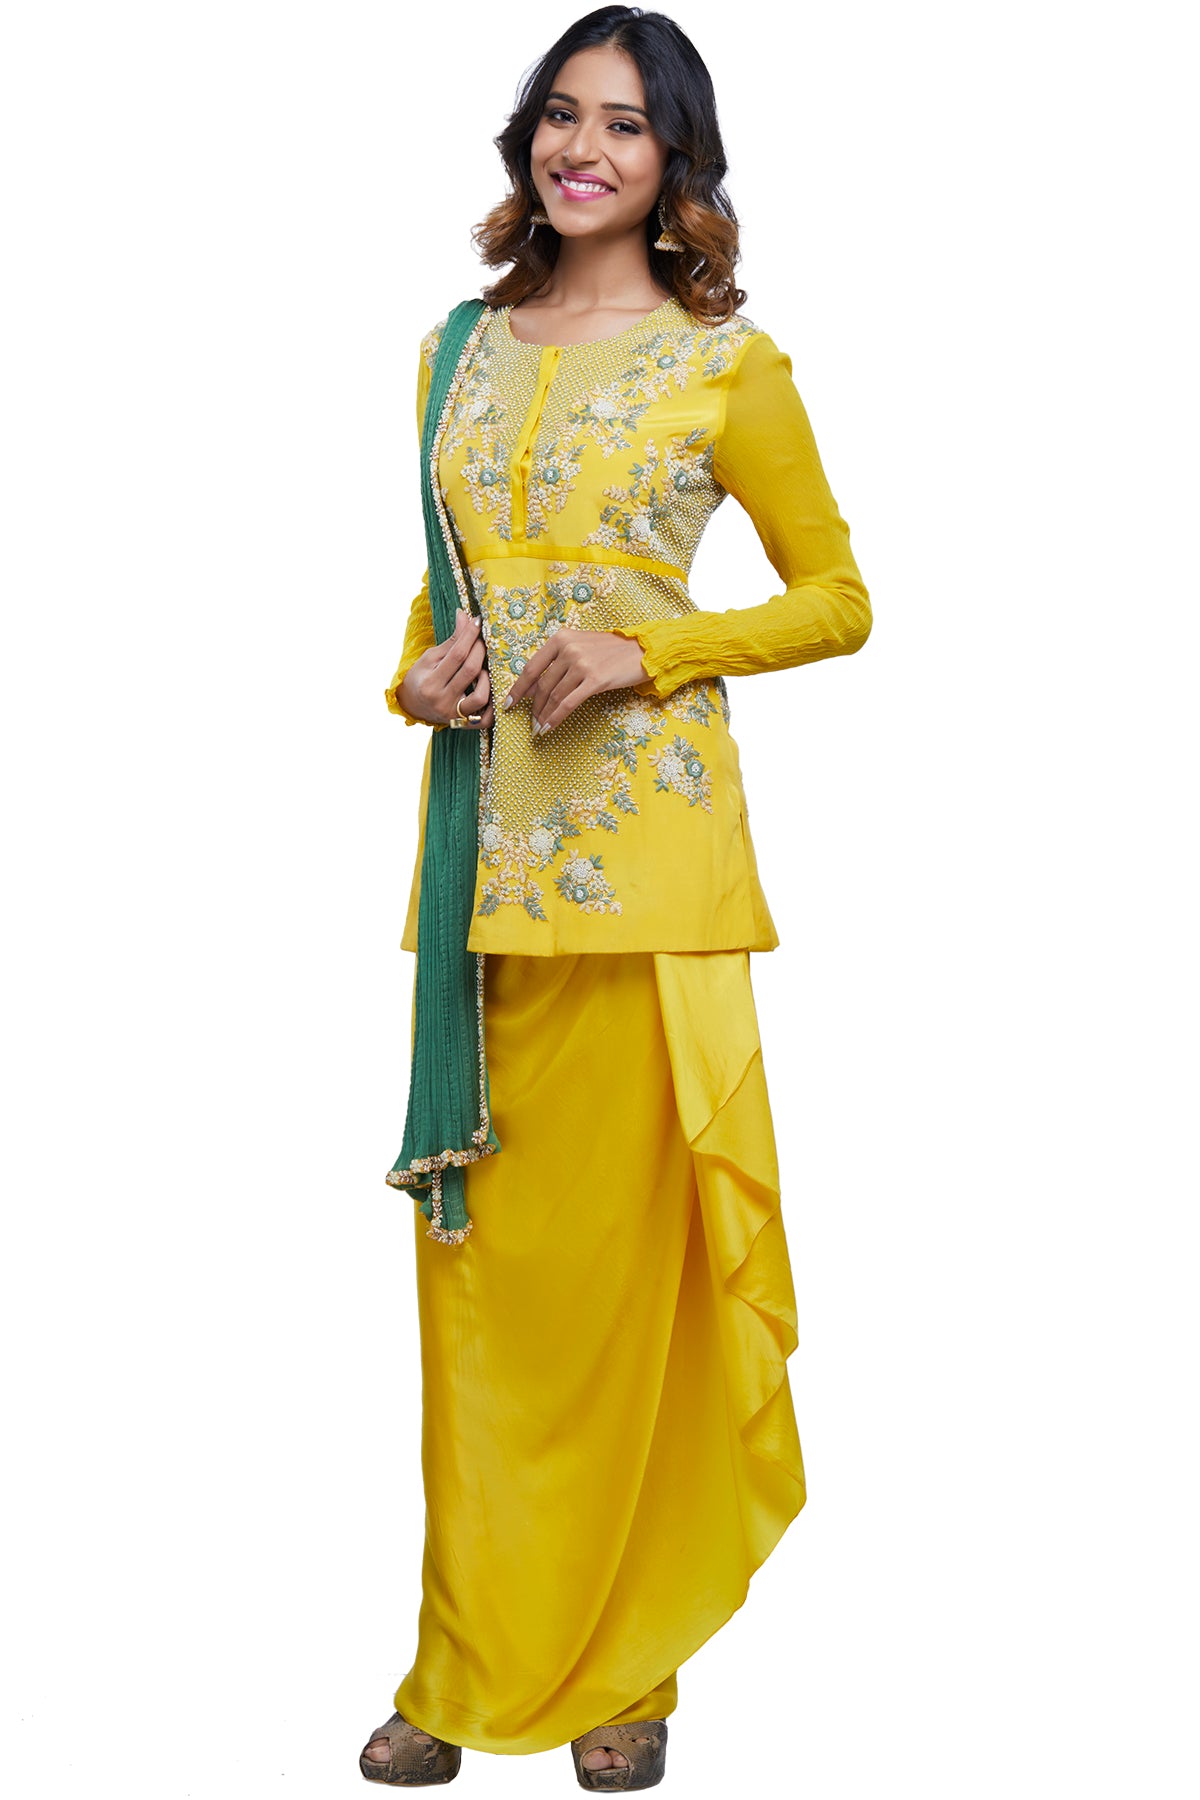 Speaking of sunshine, this raw yellow jhaal and pearl-embroidered short top is paired with a drape wrap skirt and embroidered crinkled georgette dupatta.